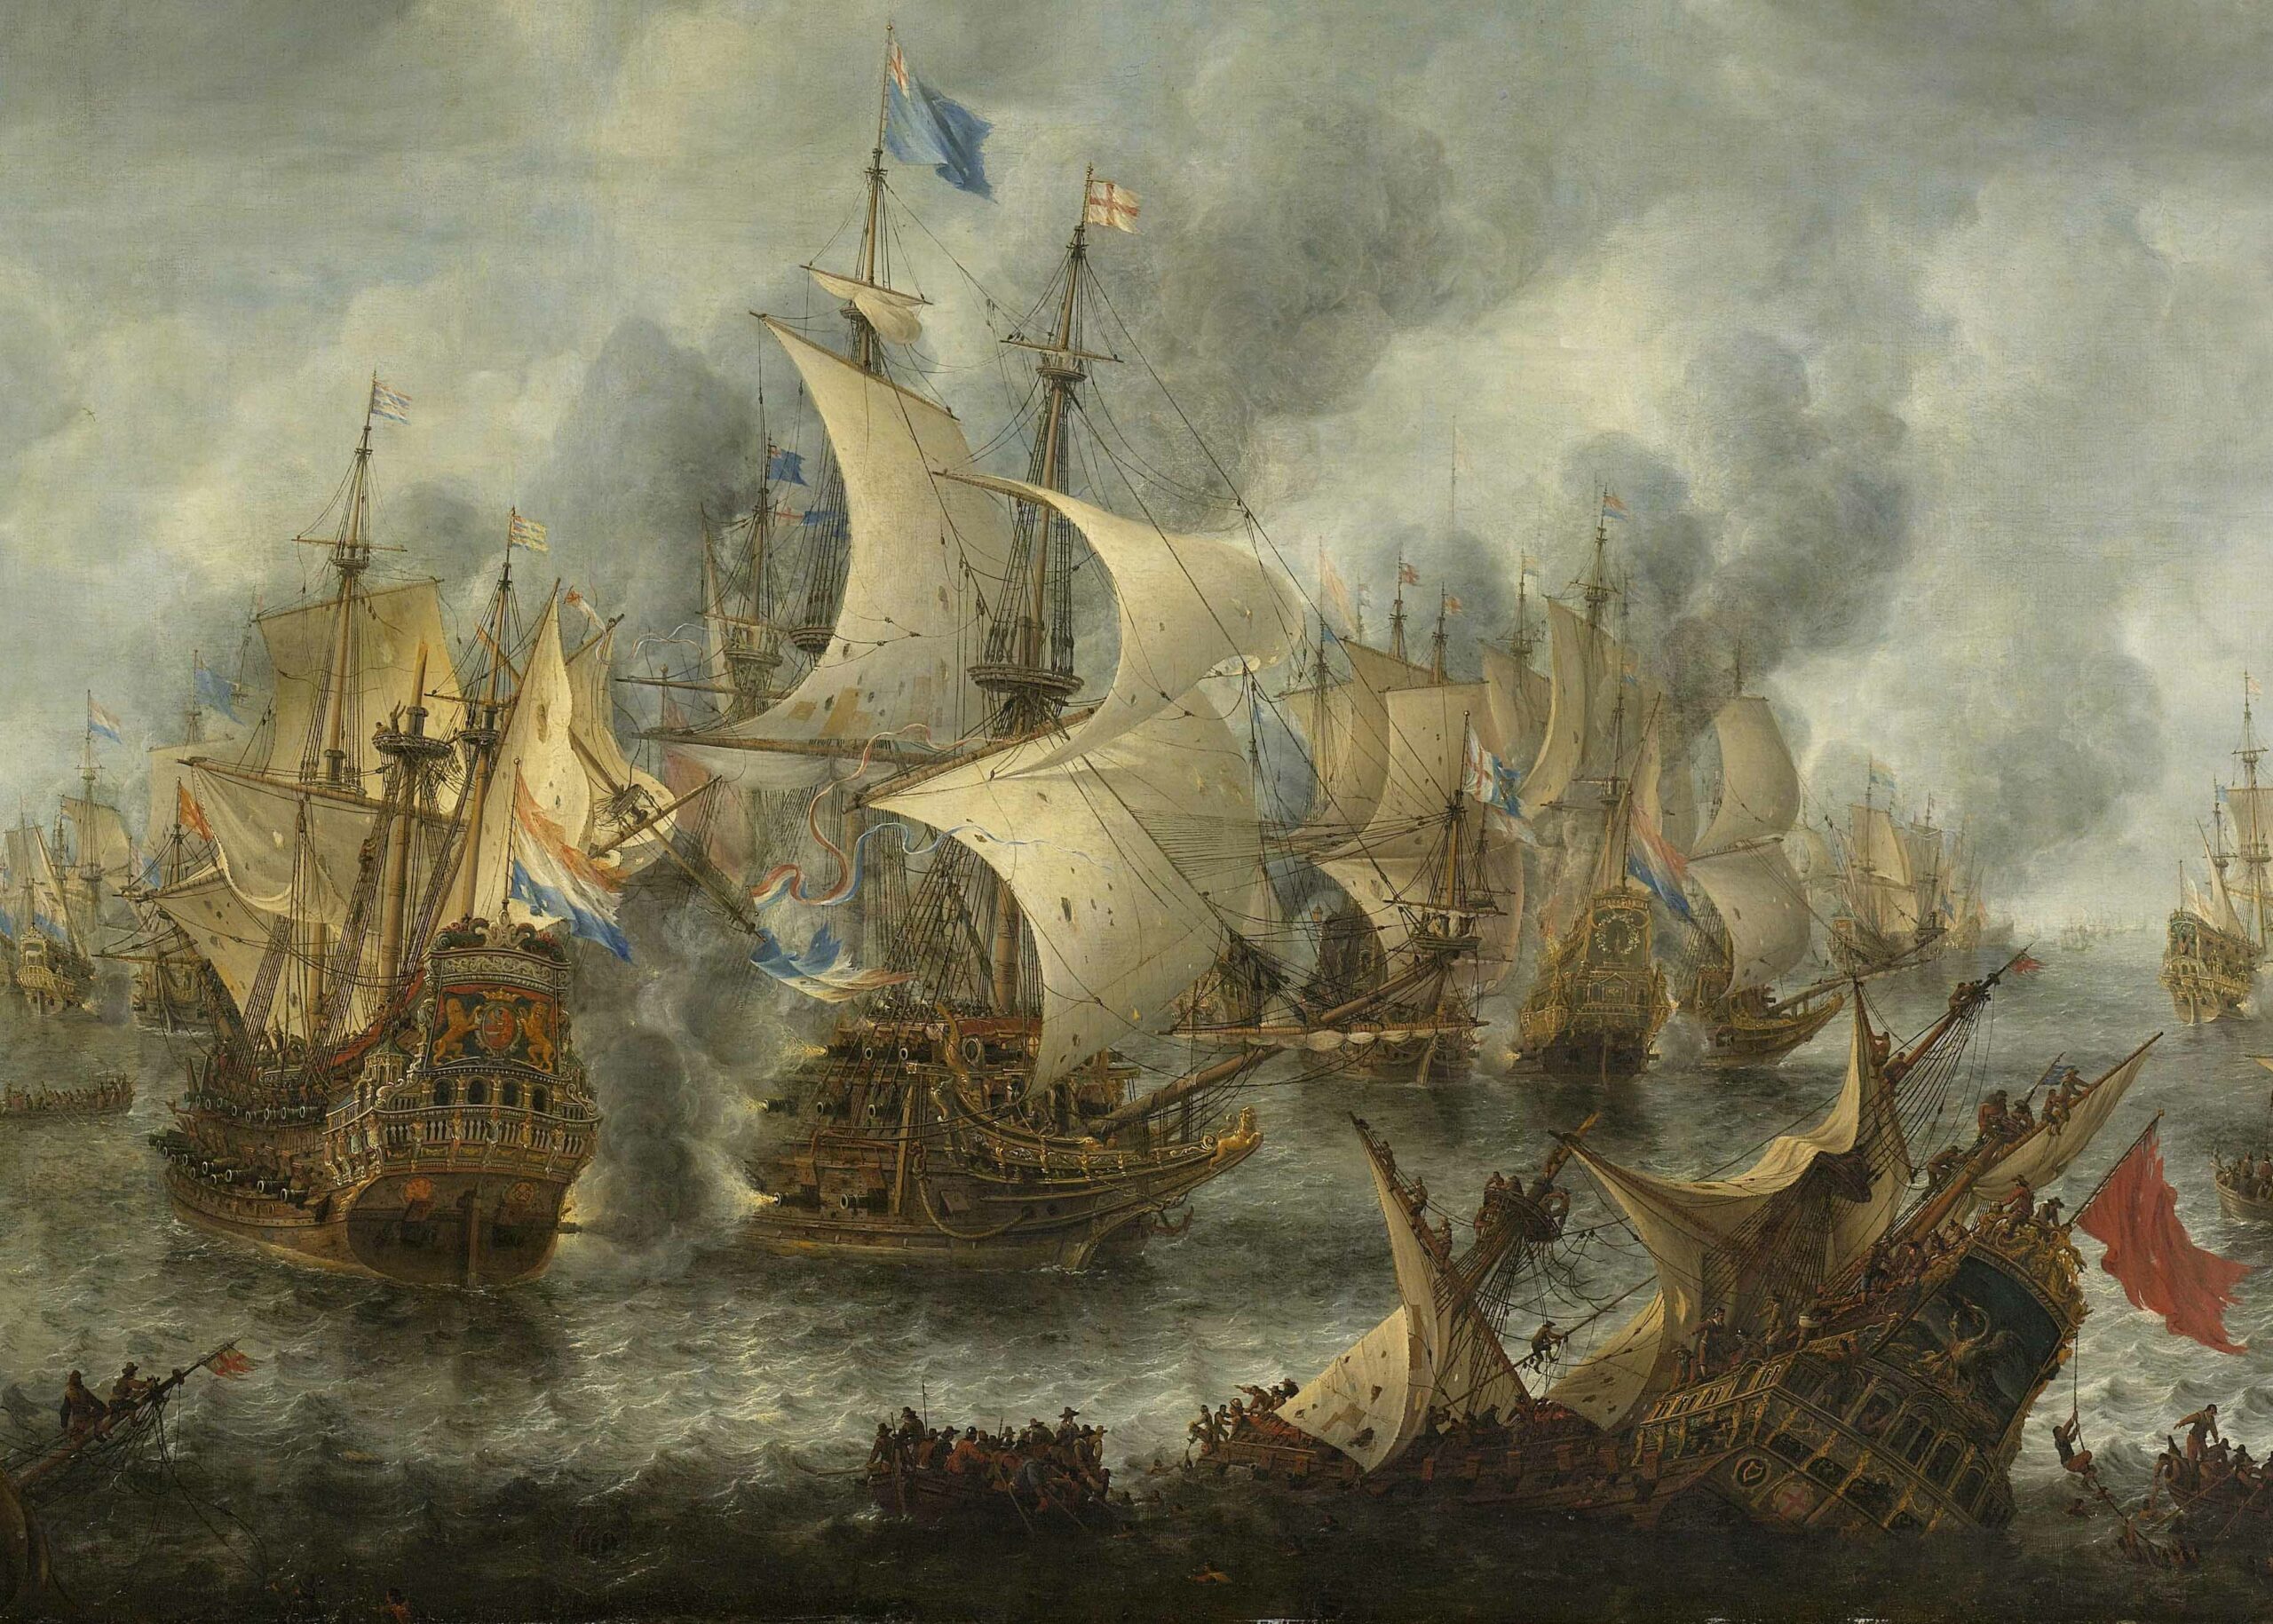 Naufraga Reperta: Medals of Shipwrecks in the 17th Century